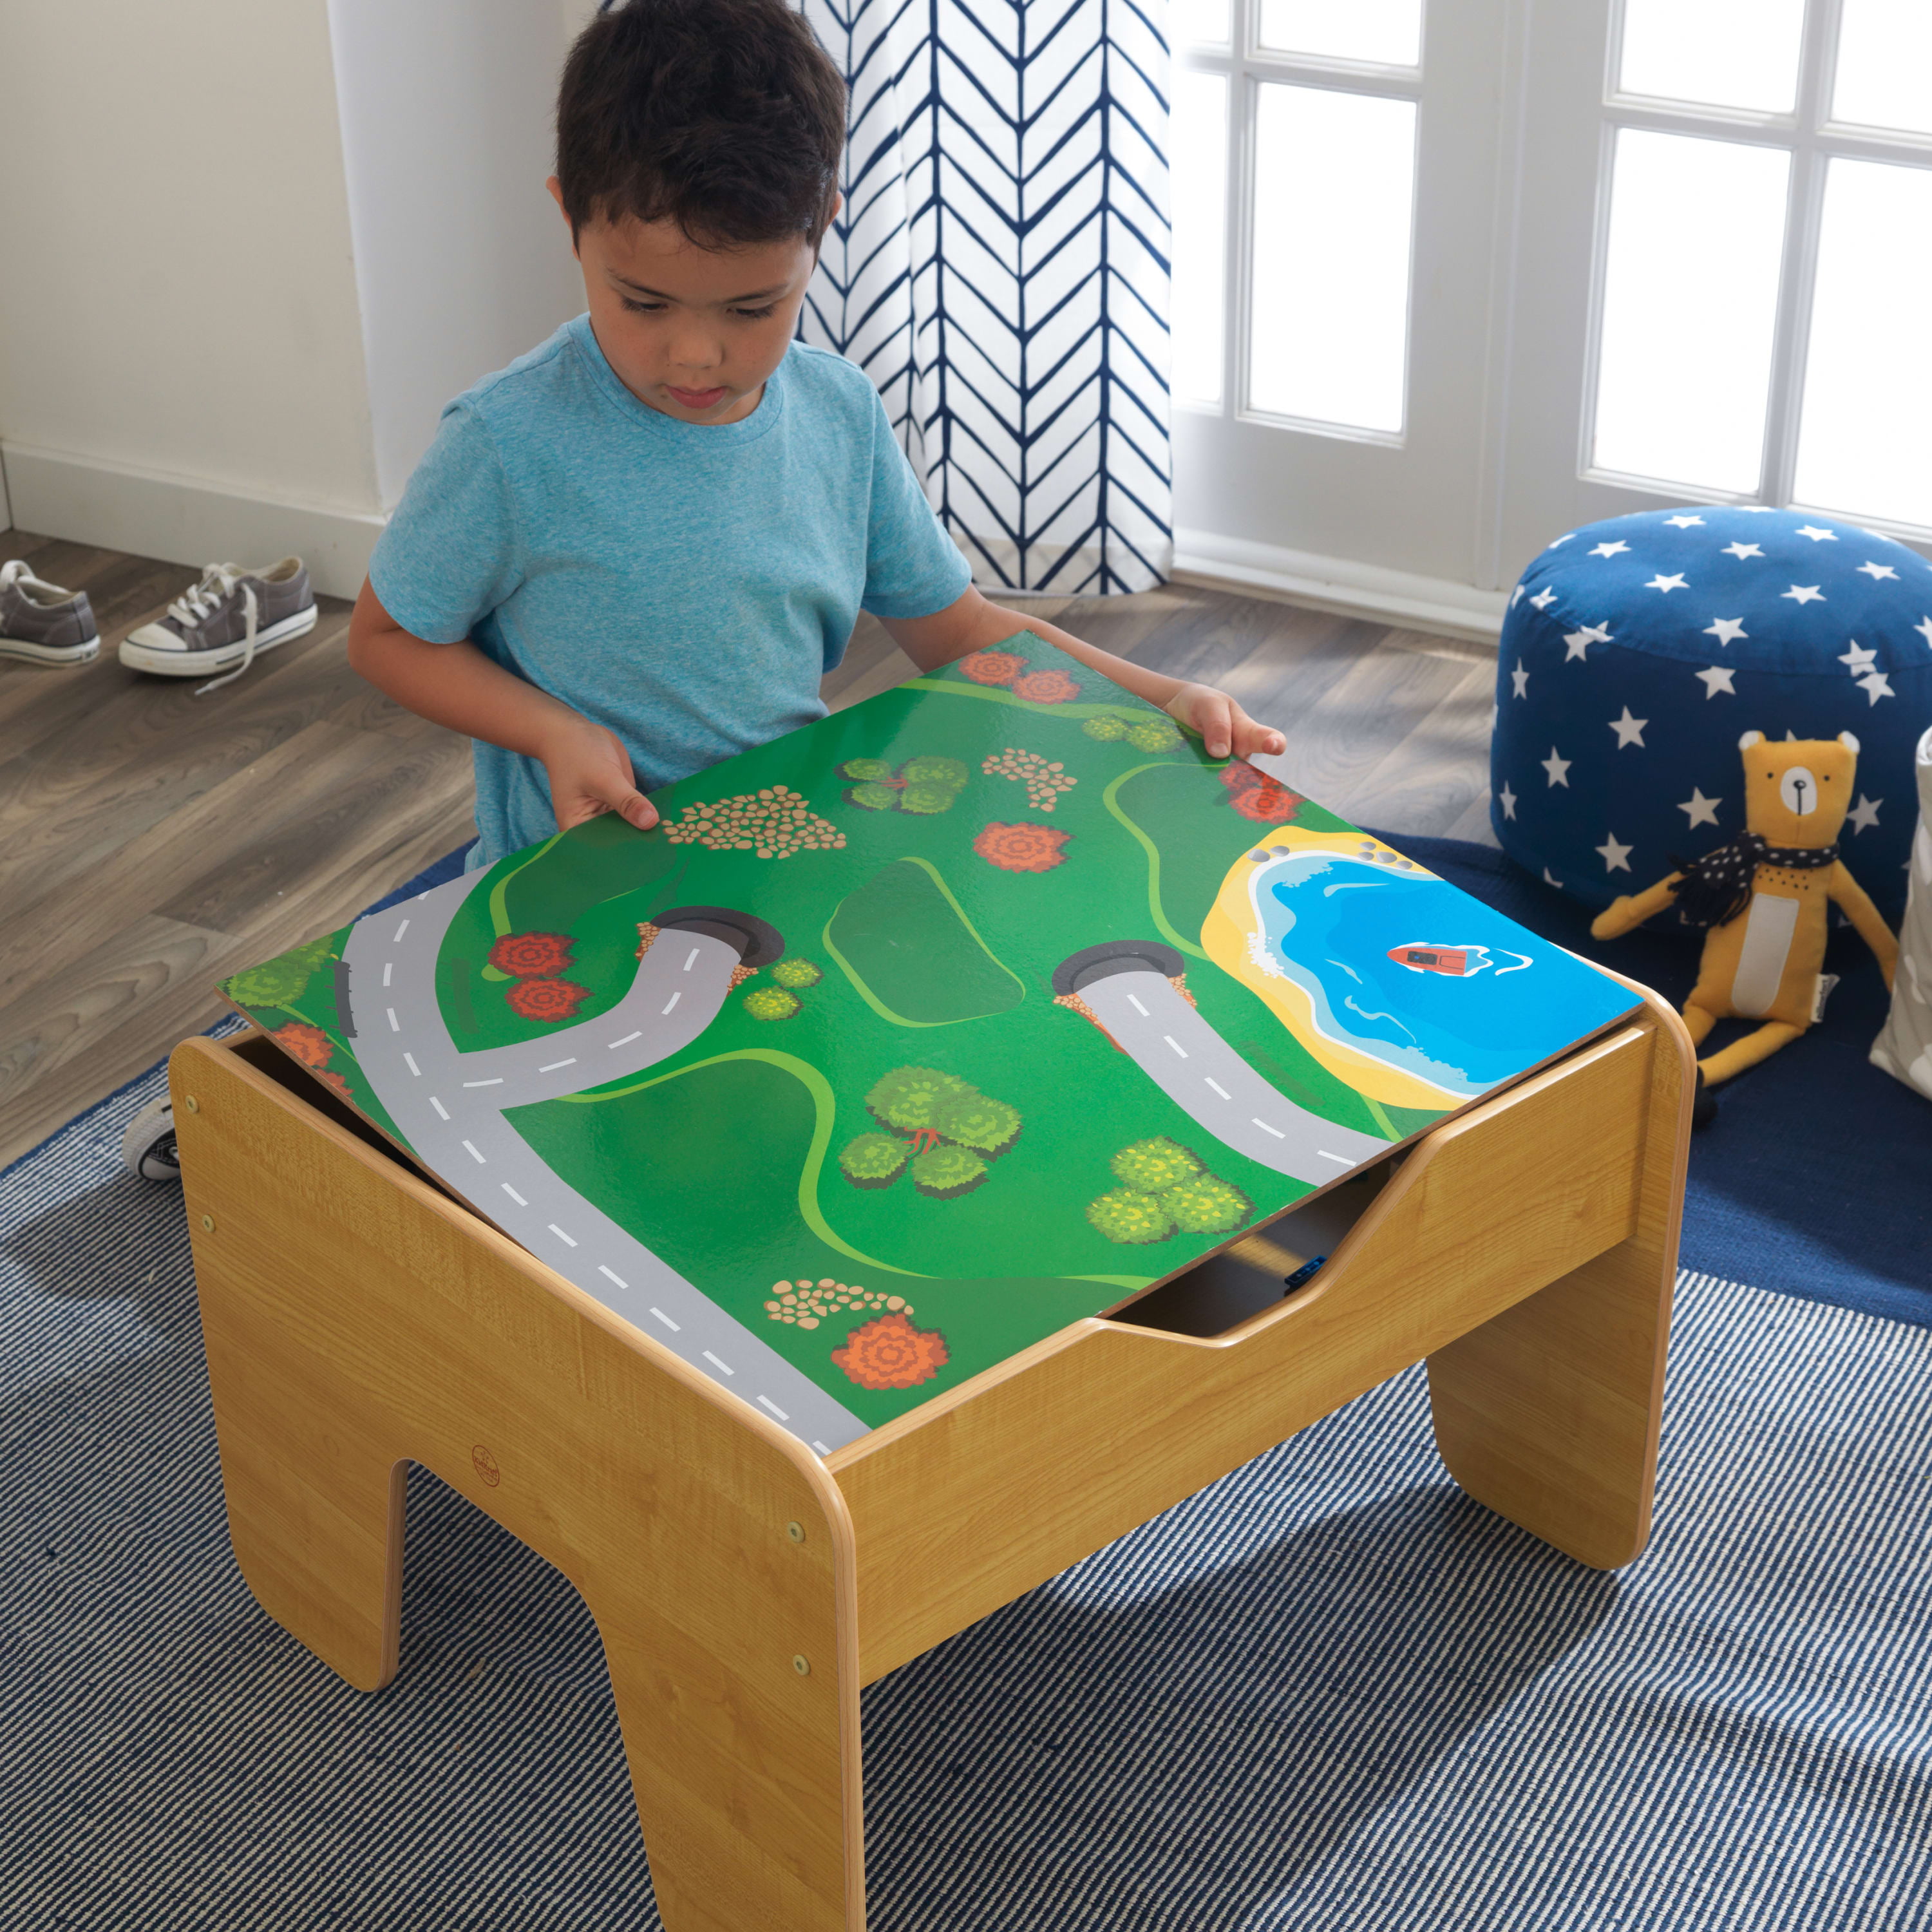 KidKraft Reversible Wooden Activity Table with Board and Train Set, Natural, for Ages 3+ Years - image 4 of 11